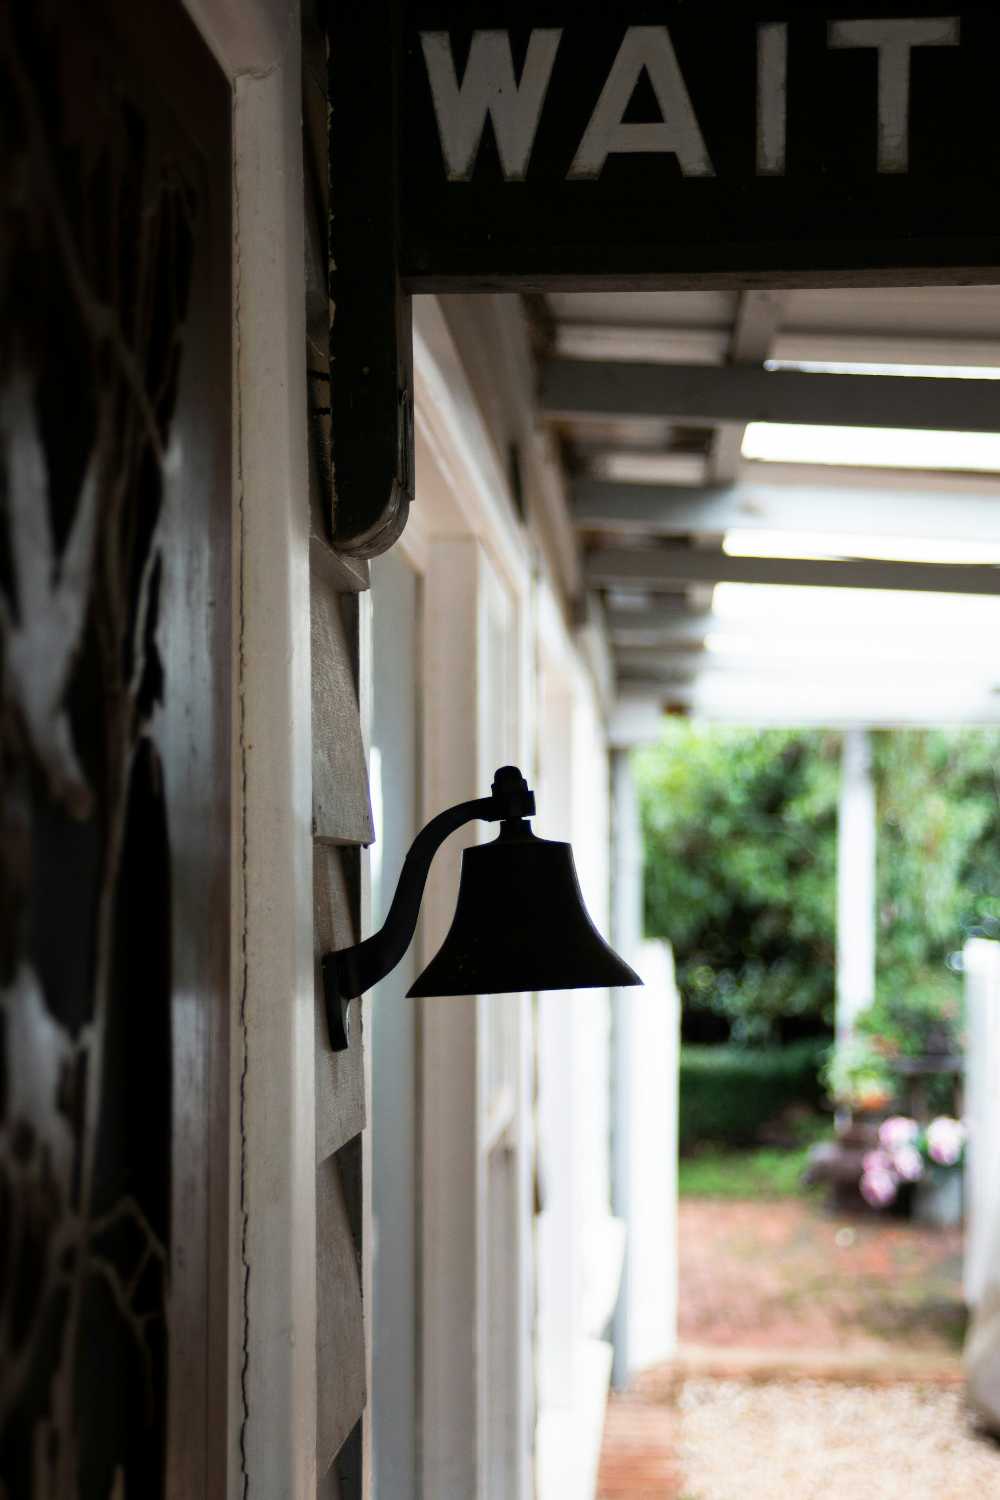 Old door bell at the historic general store near Trentham, Australia.